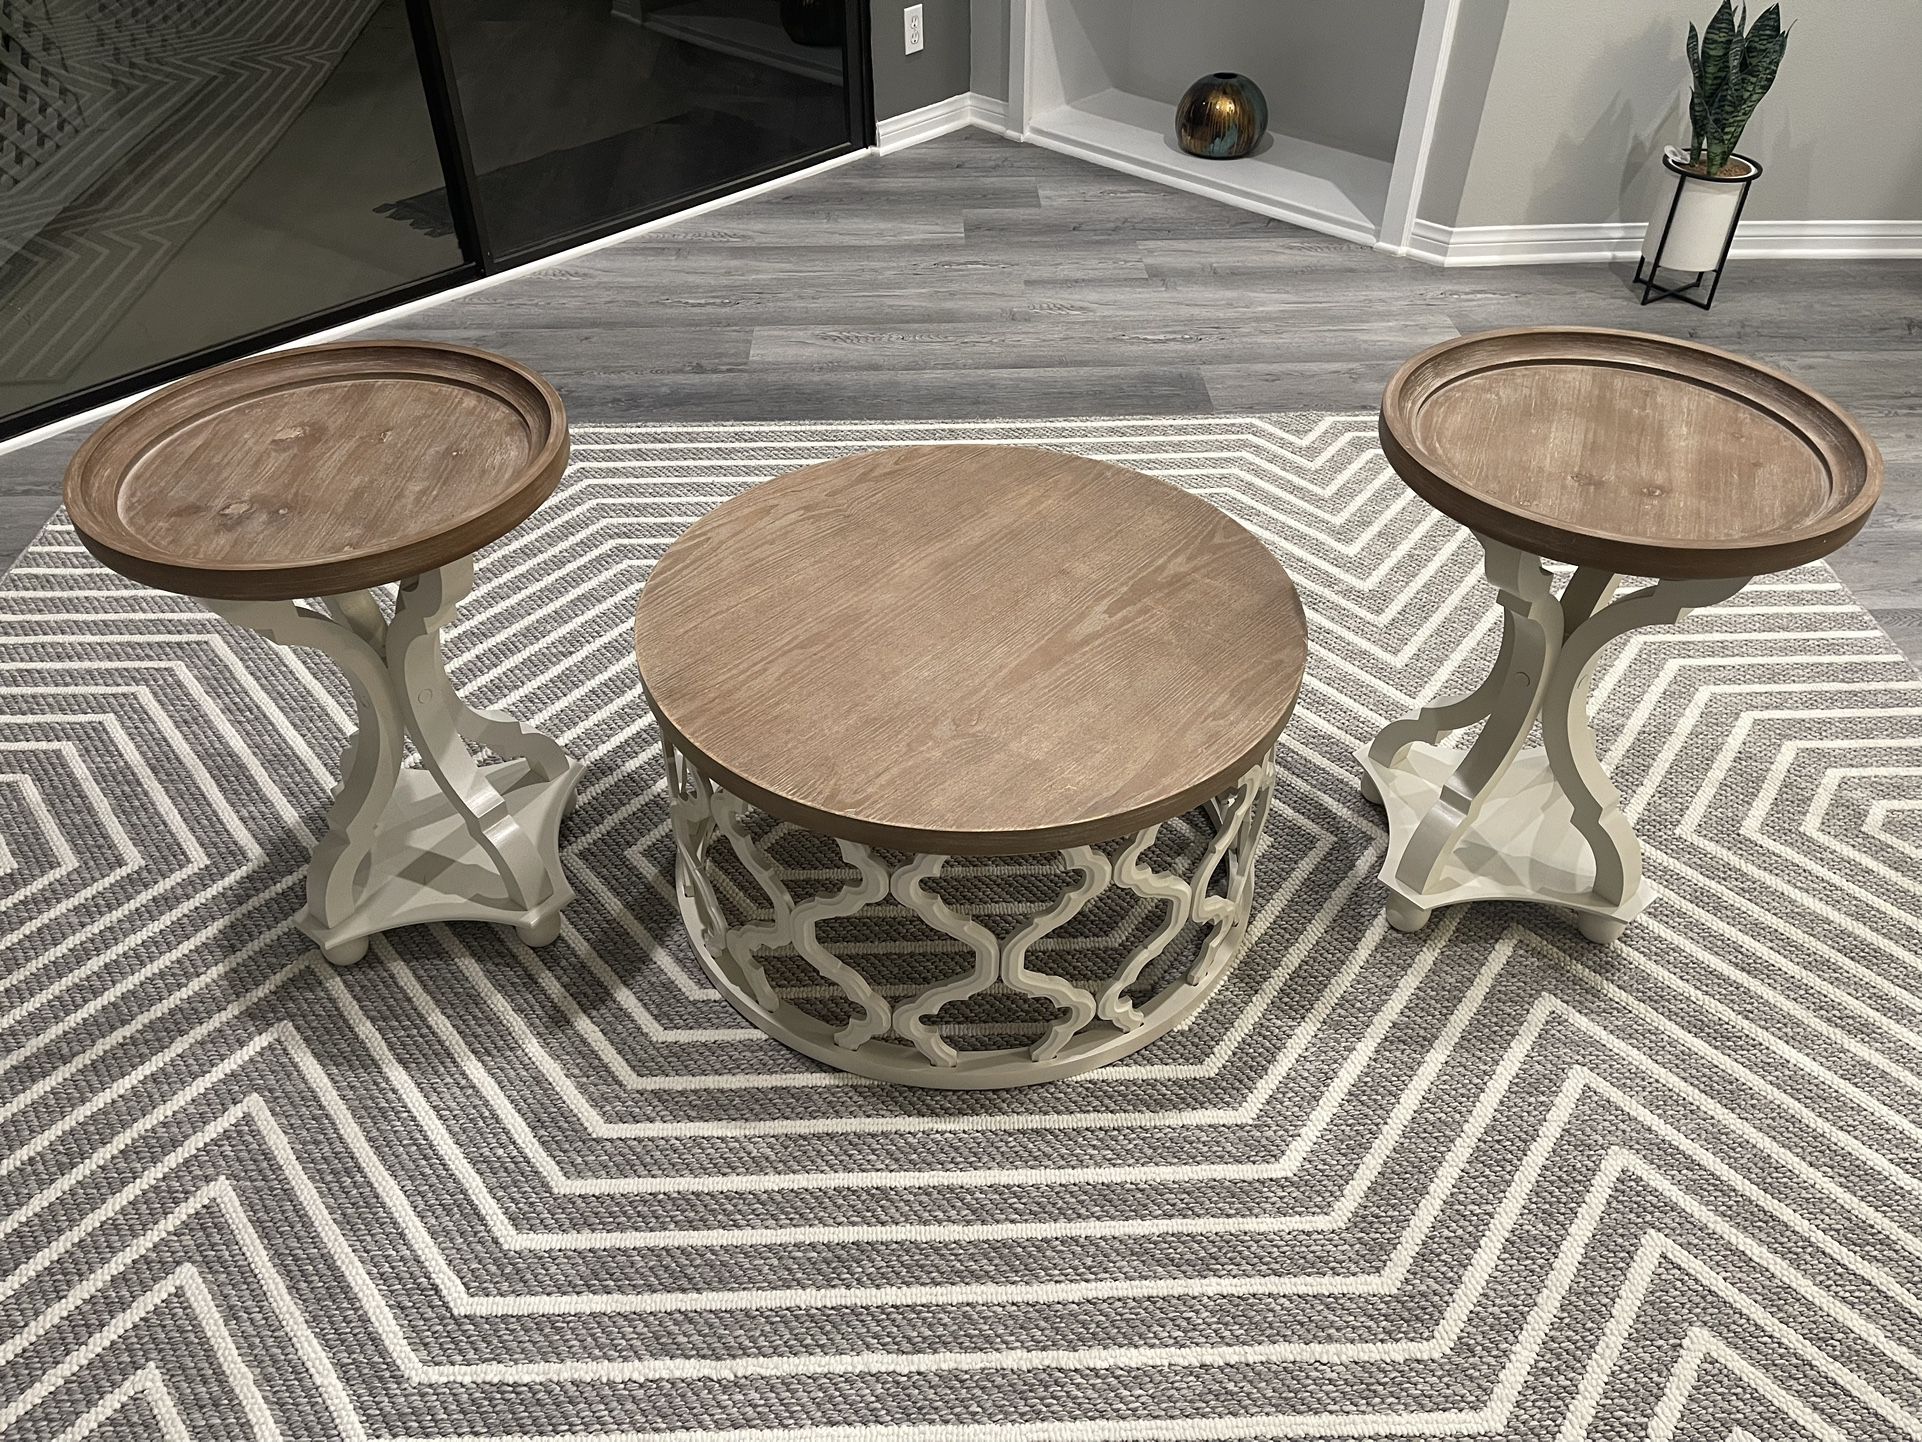 Coffee Table And End Tables